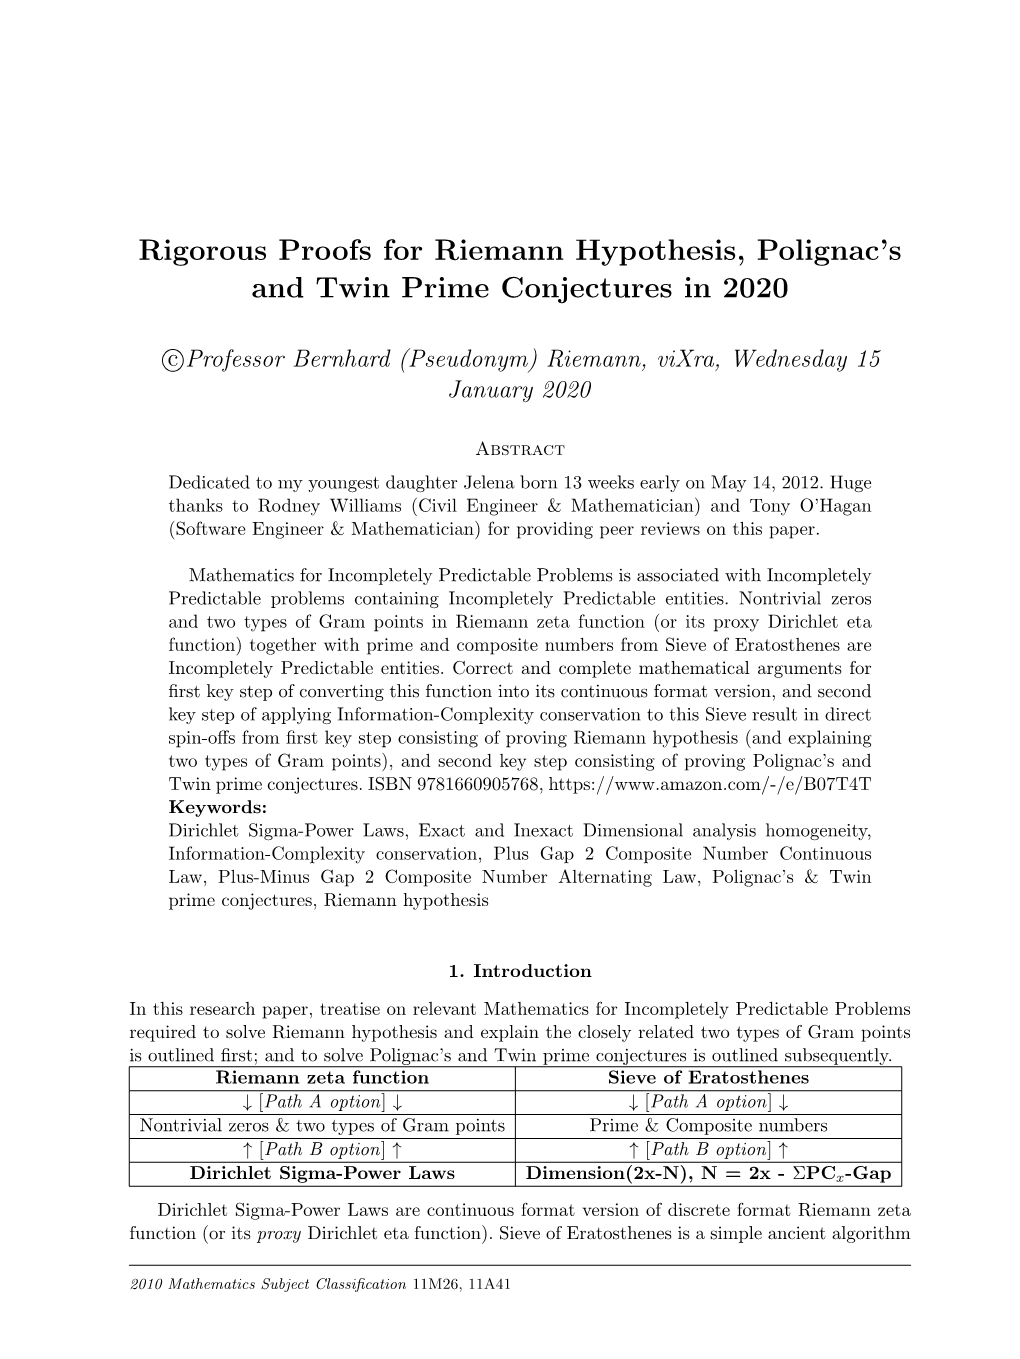 Rigorous Proofs for Riemann Hypothesis, Polignac's and Twin